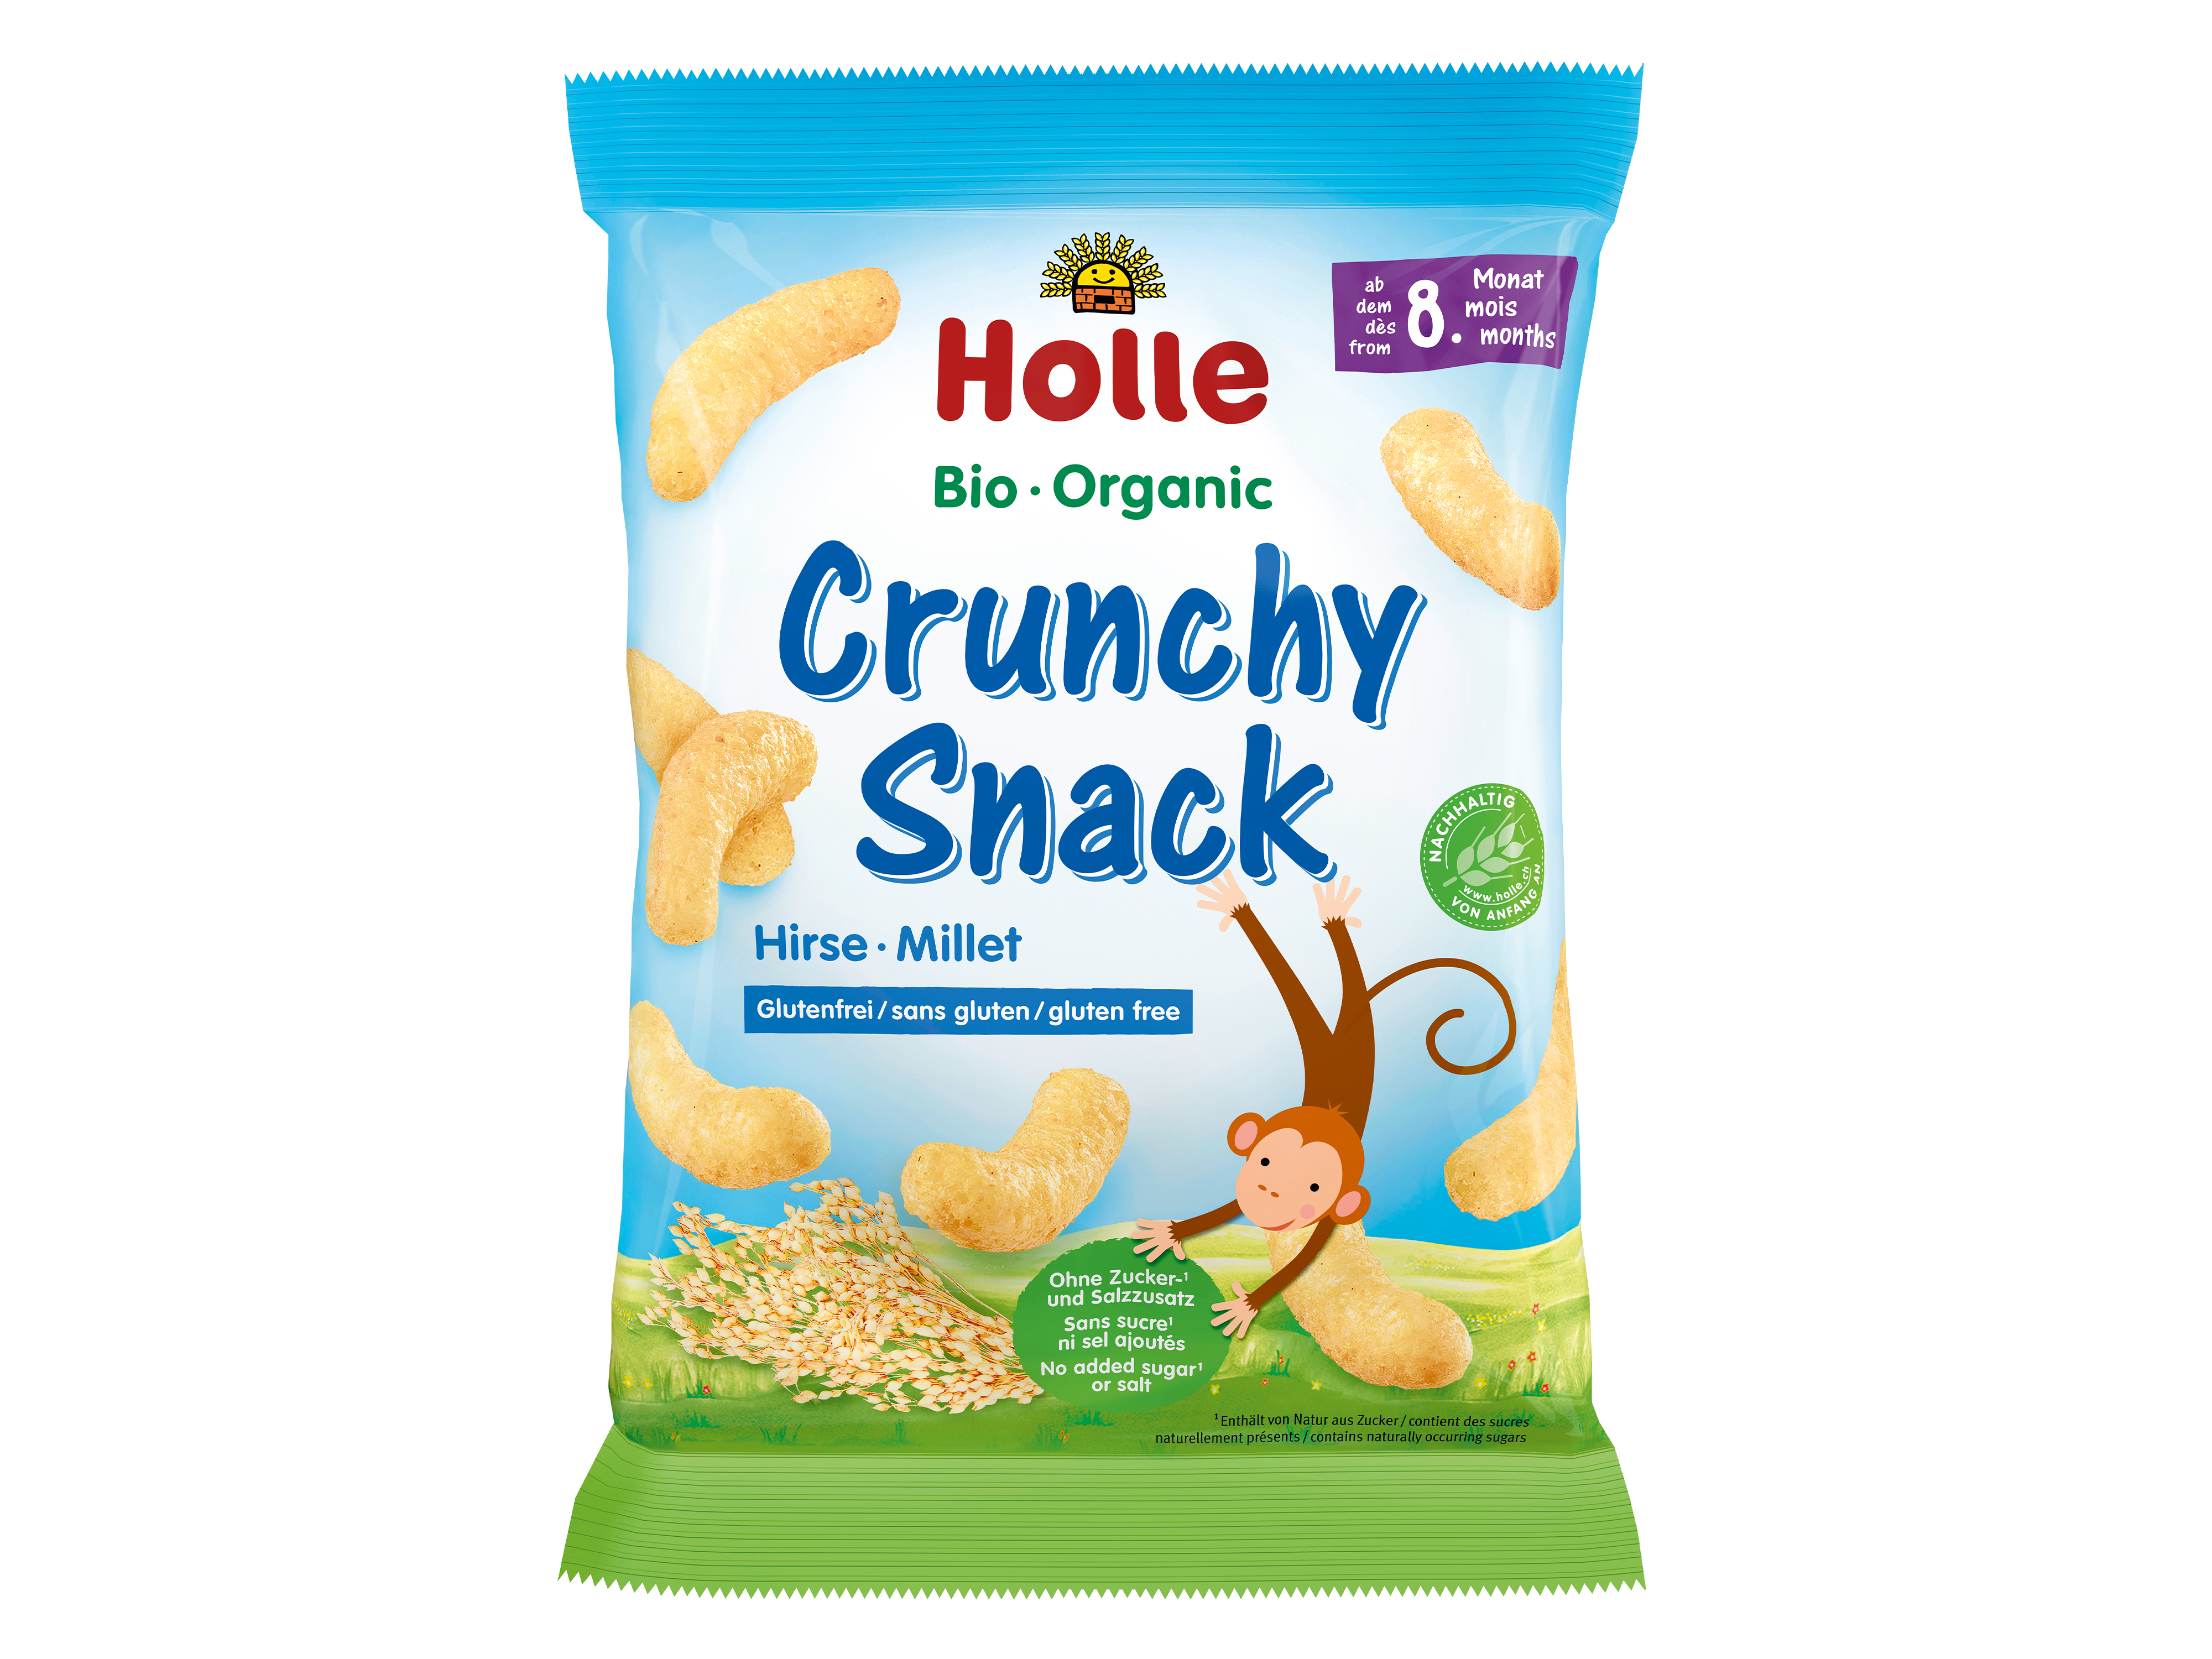 Holle Puffet Hirse Snack, 25 gram